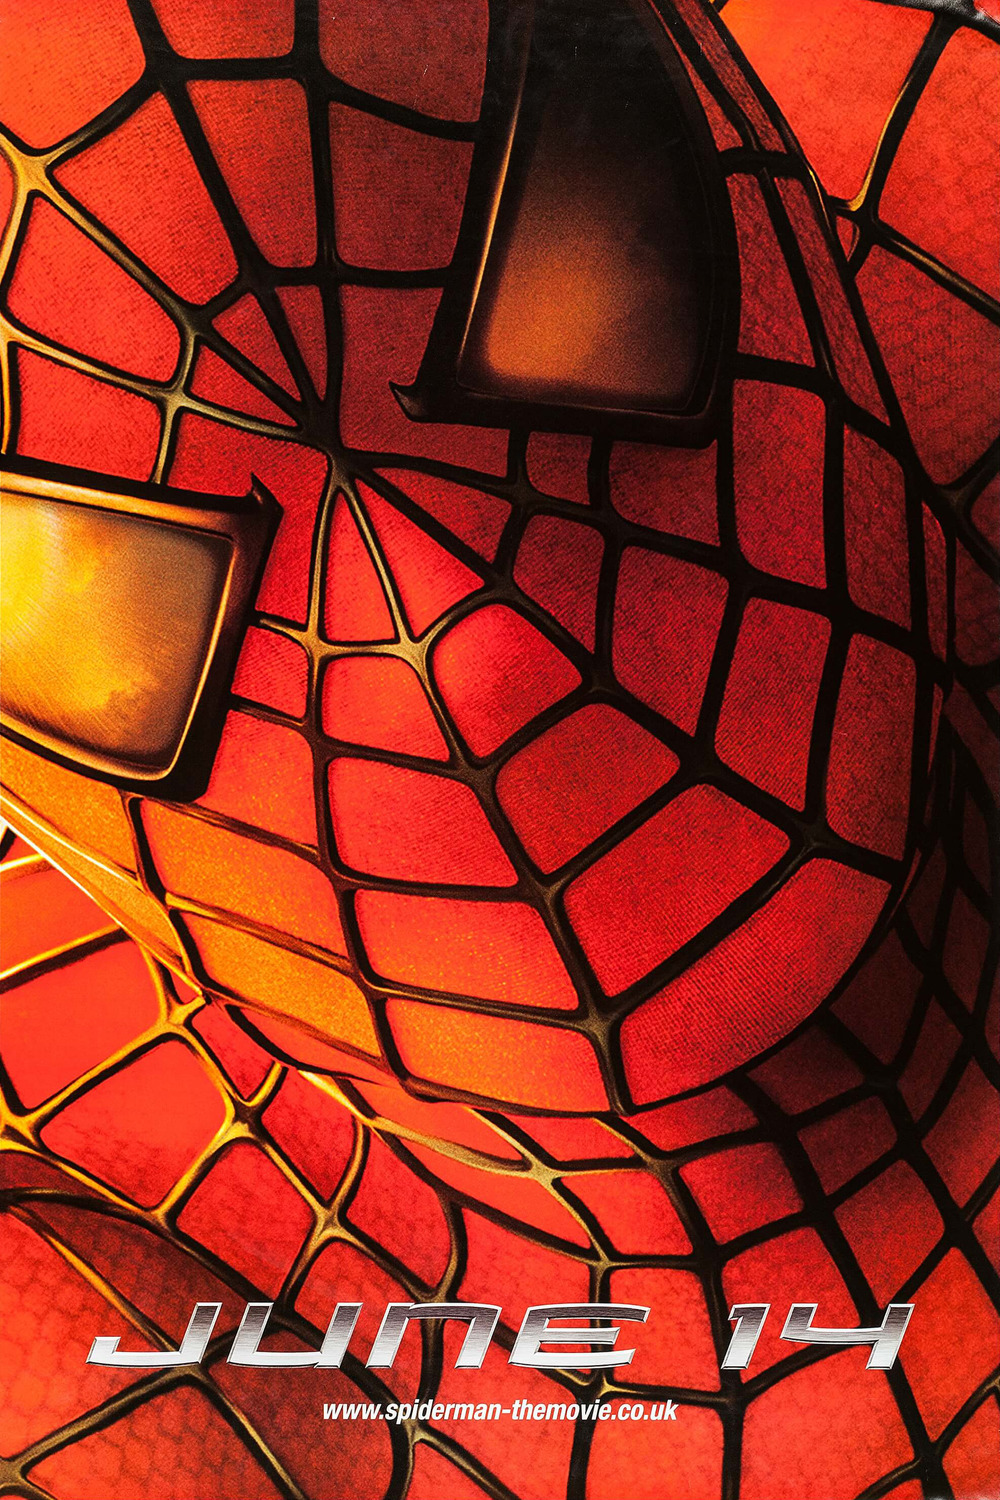 Extra Large Movie Poster Image for Spider-man (#4 of 5)